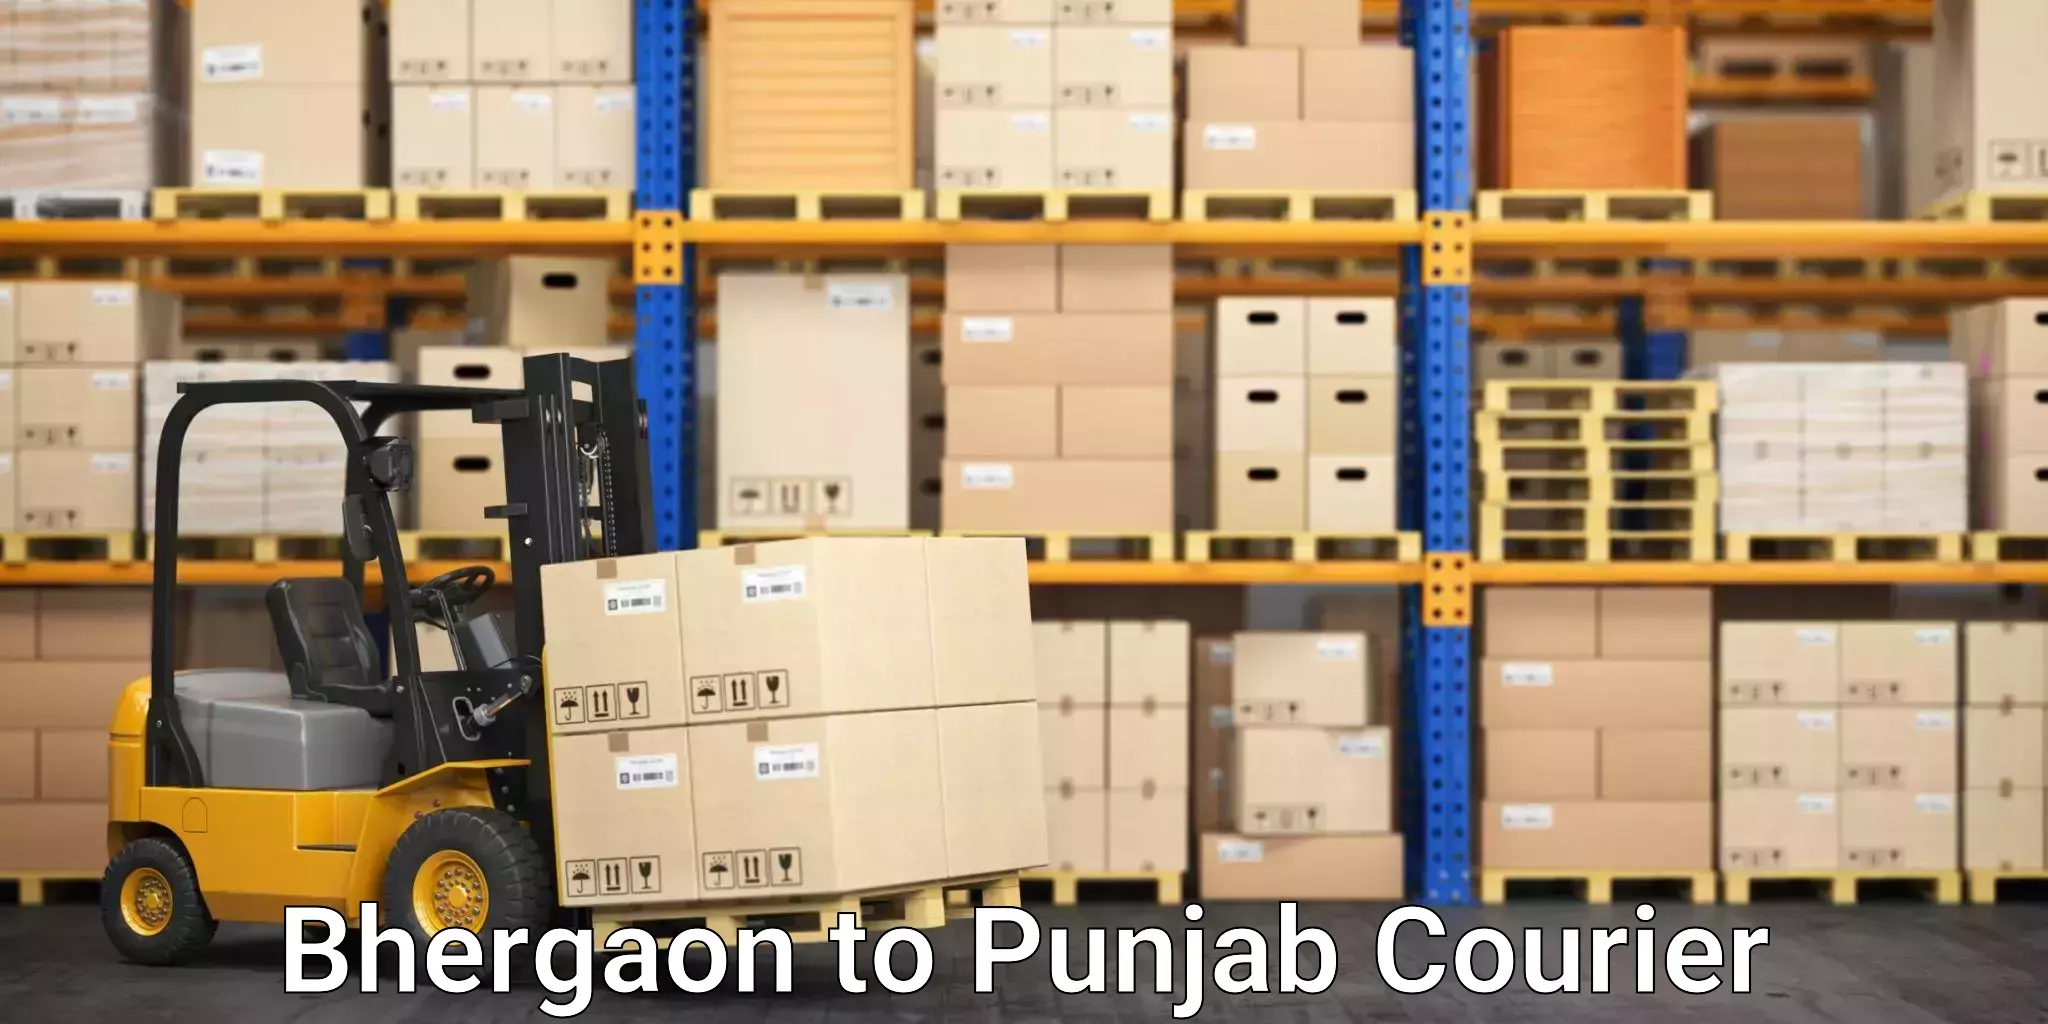 Nationwide shipping capabilities Bhergaon to IIT Ropar